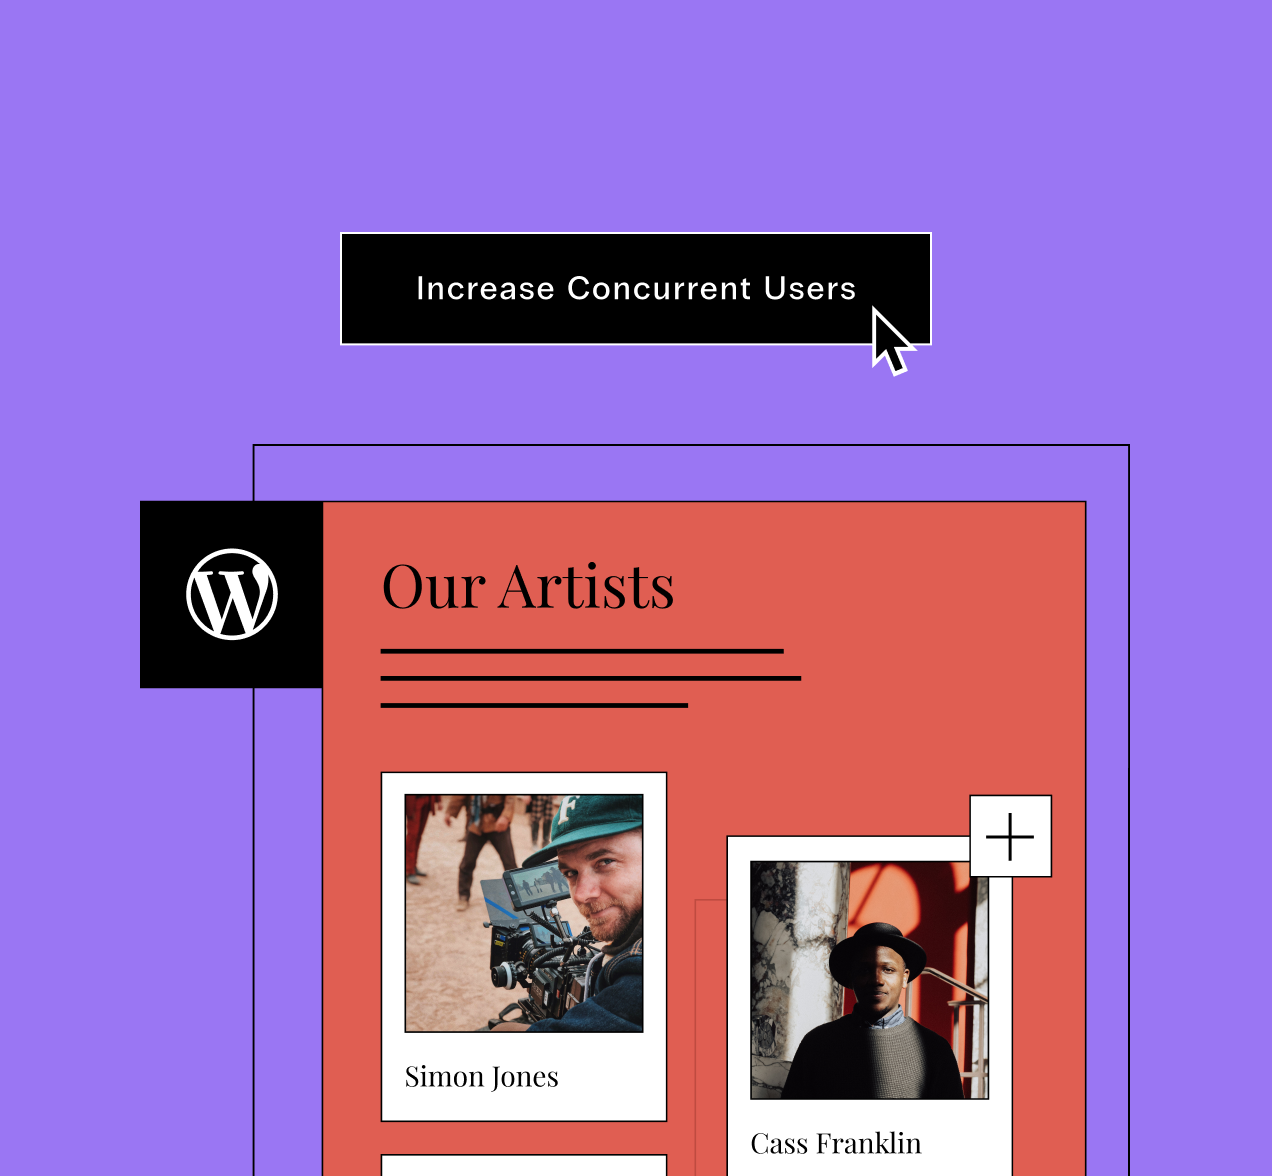 An artist’s website receives heavy traffic, they click increase concurrent users to free up resources without paying extra